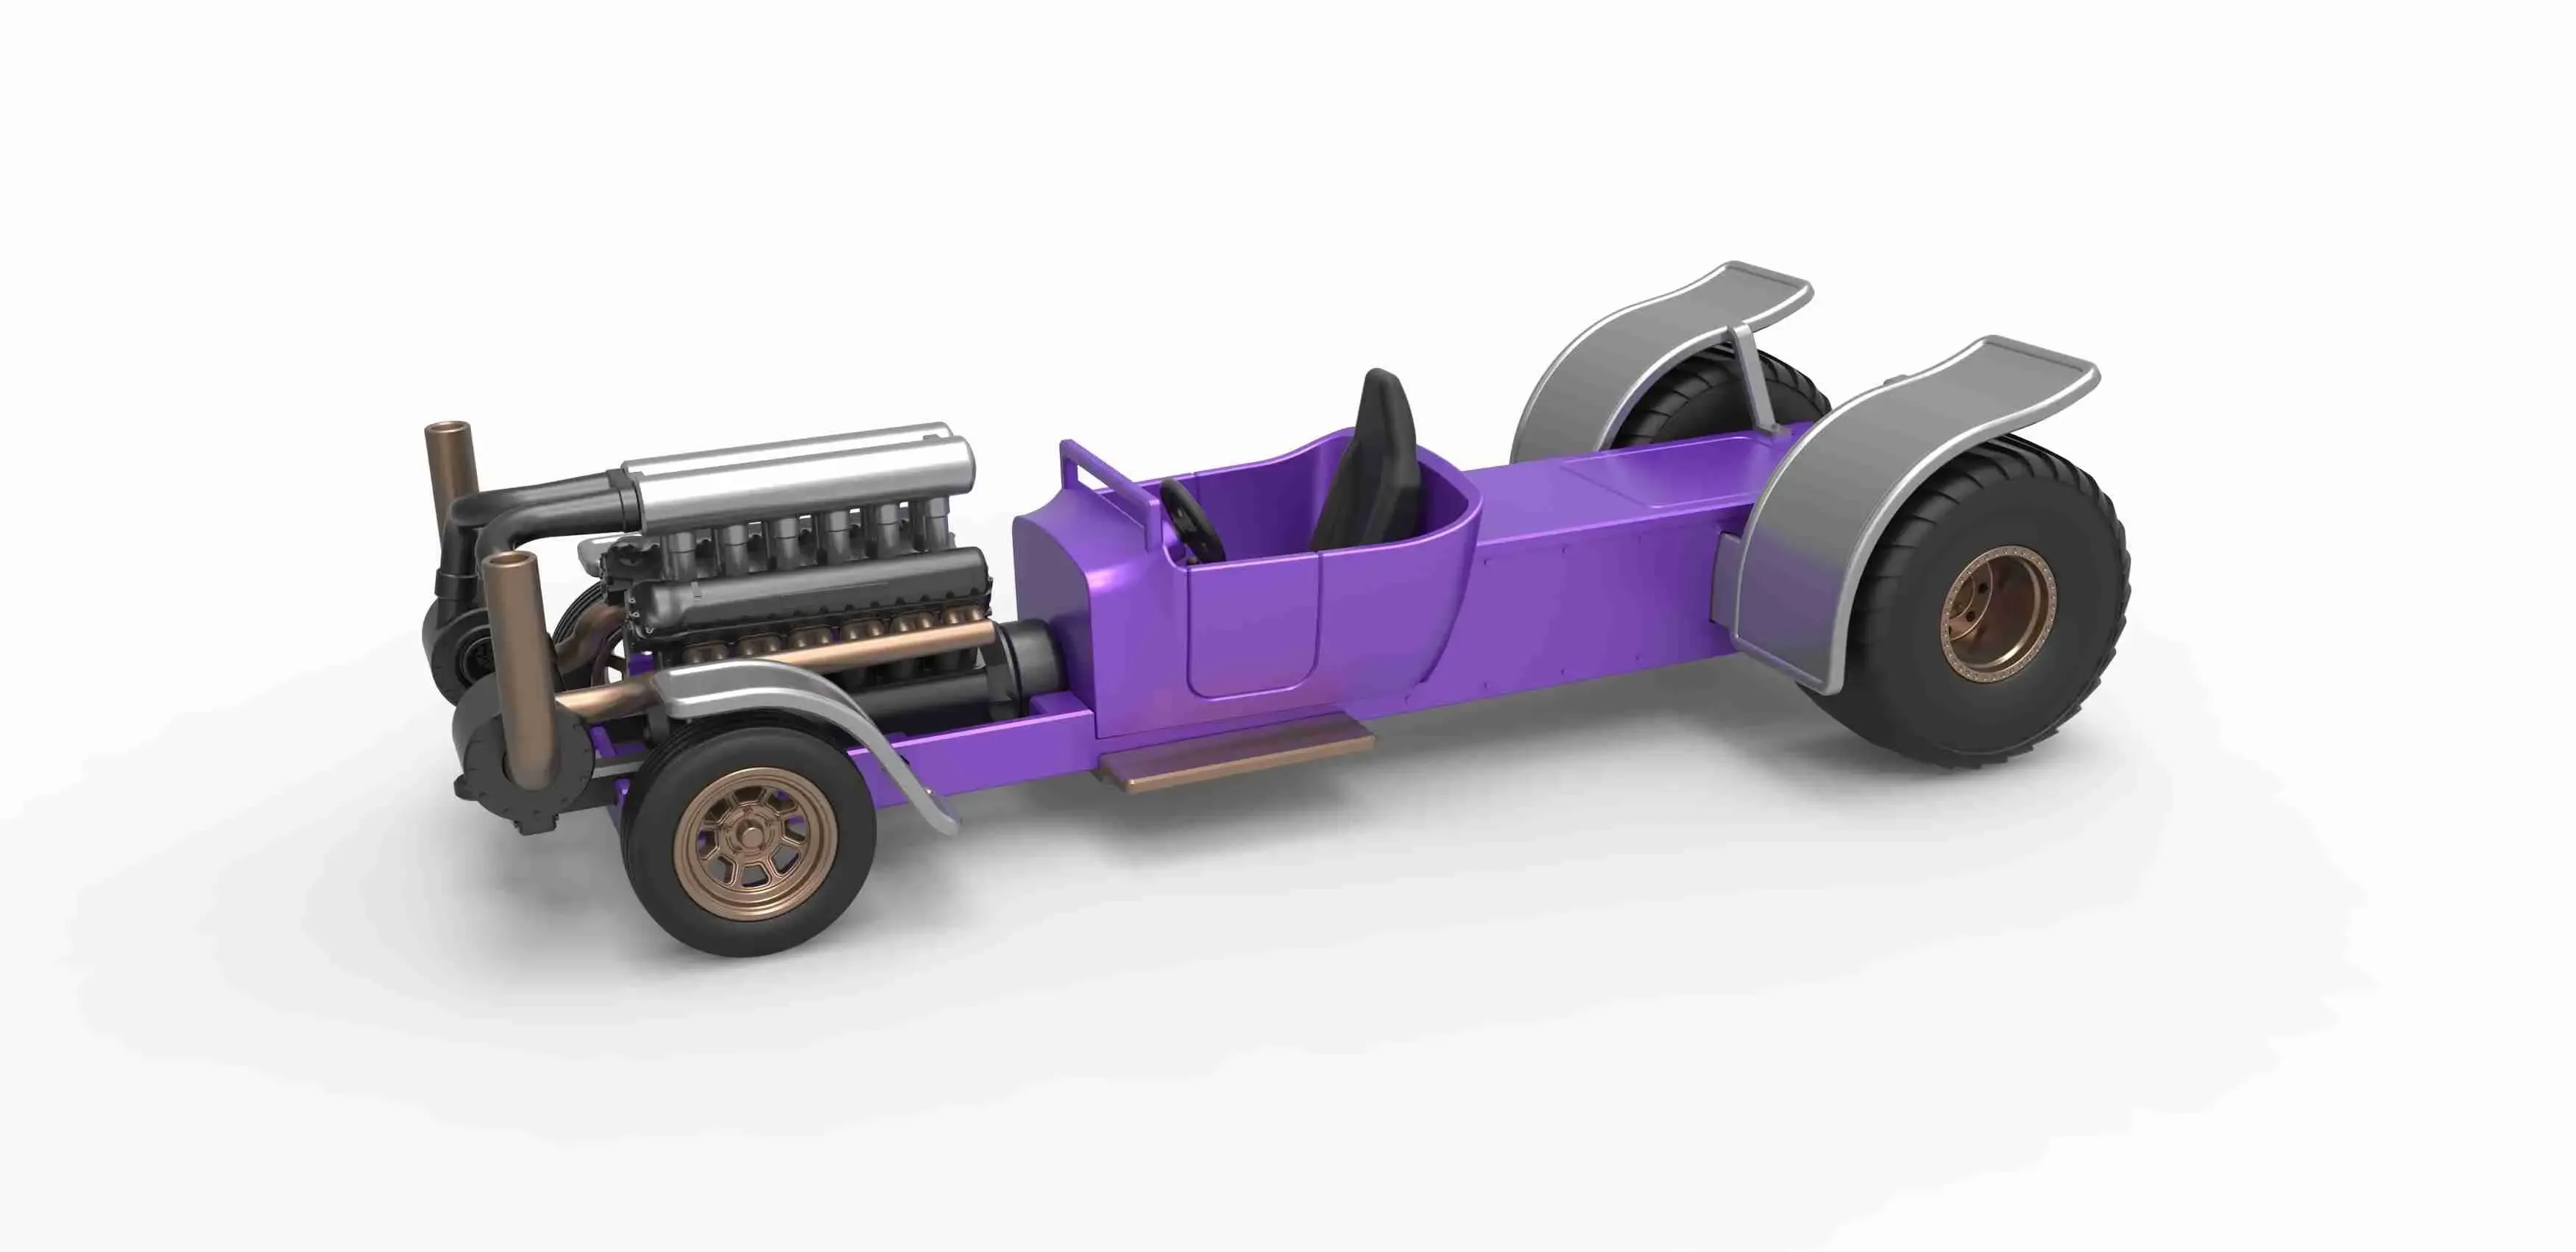 Pulling truck 2wd Hot rod with turbo V12 Scale 1:25